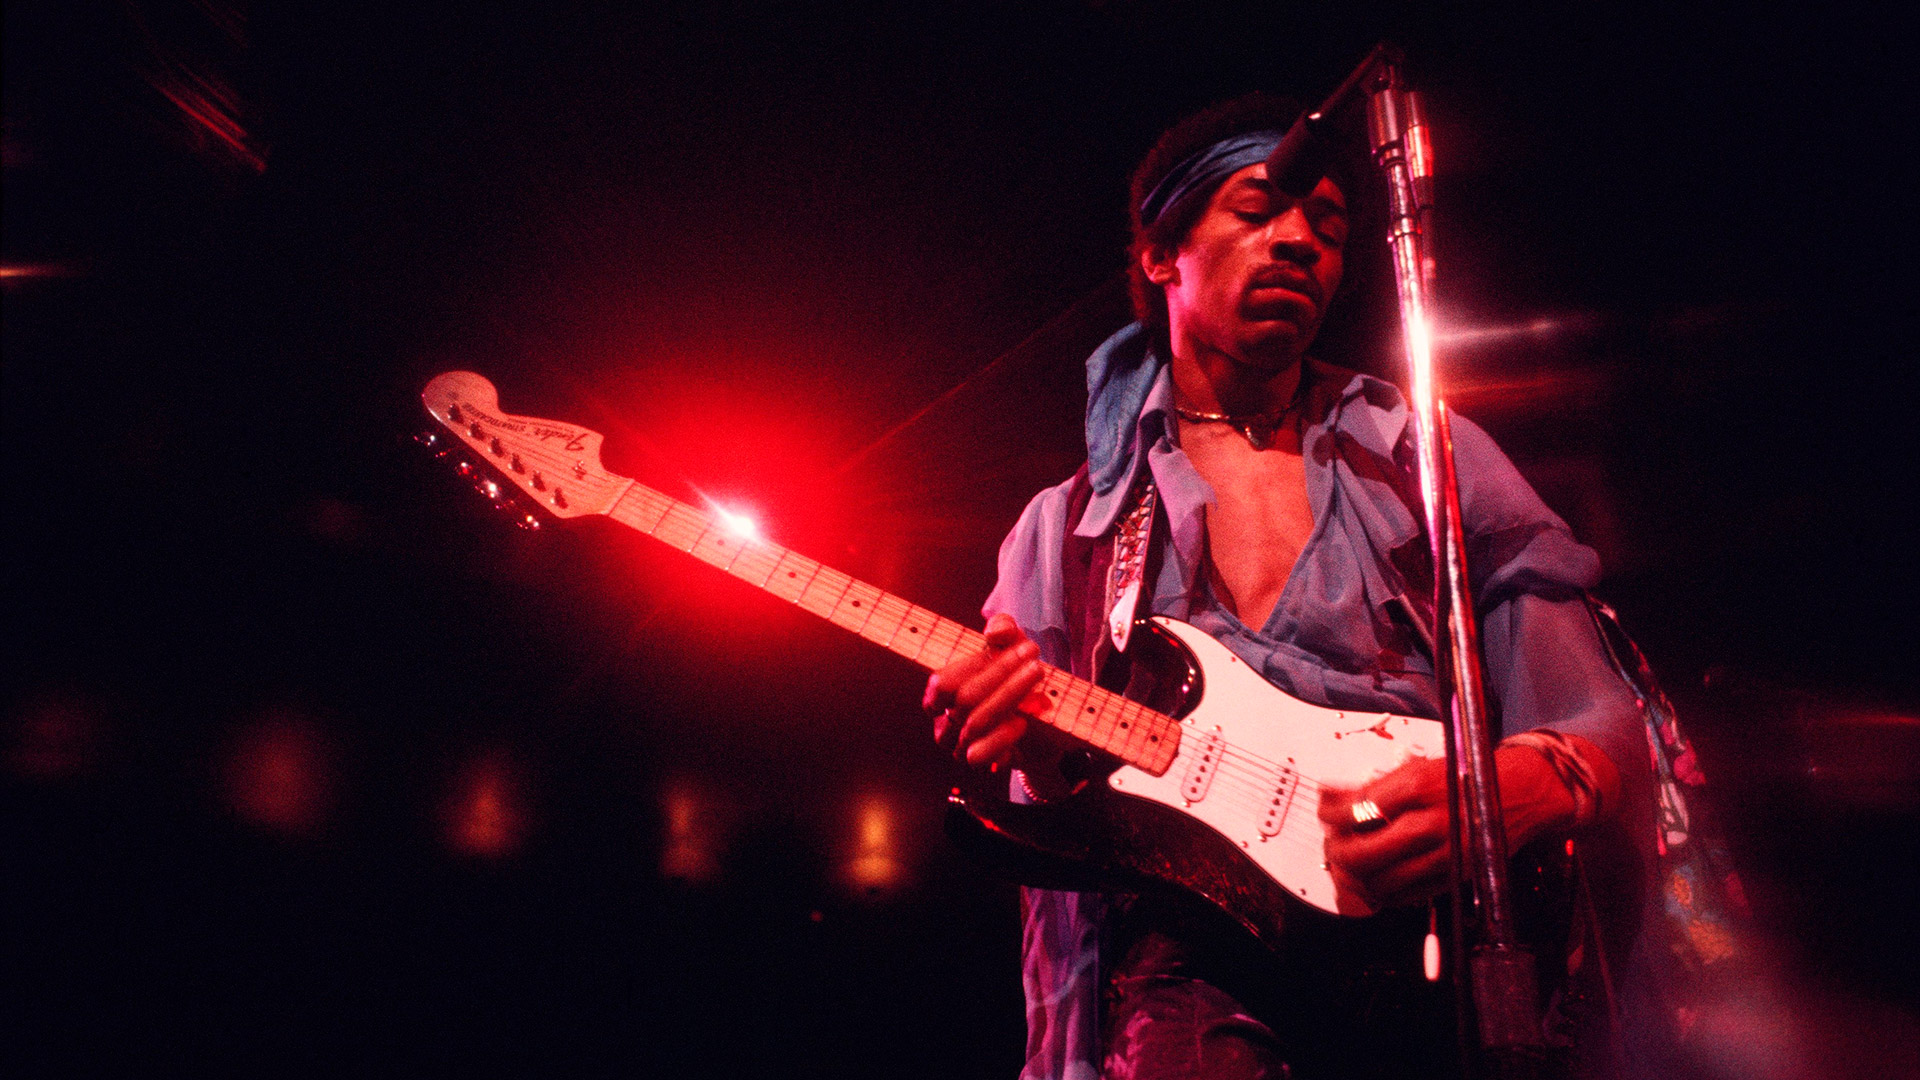 Jimi Hendrix in concert at Madison Square Garden in New York in 1969 (Photo by Walter Iooss Jr./Getty Images)